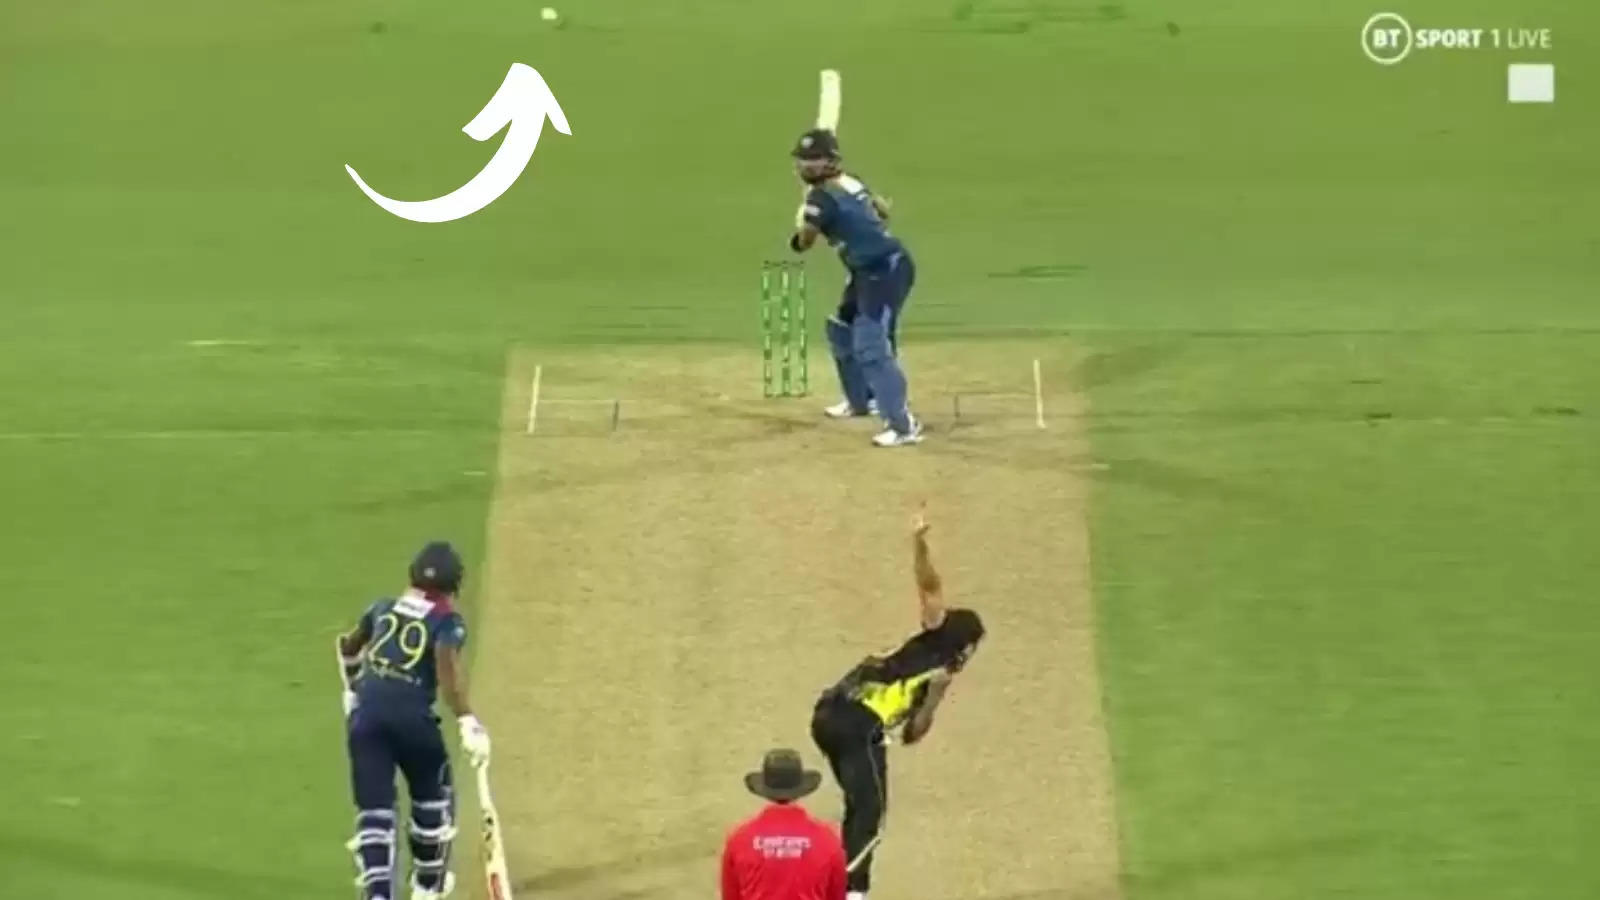 WATCH: Mitchell Starc bowls funny moon ball wide; leaves keeper shocked